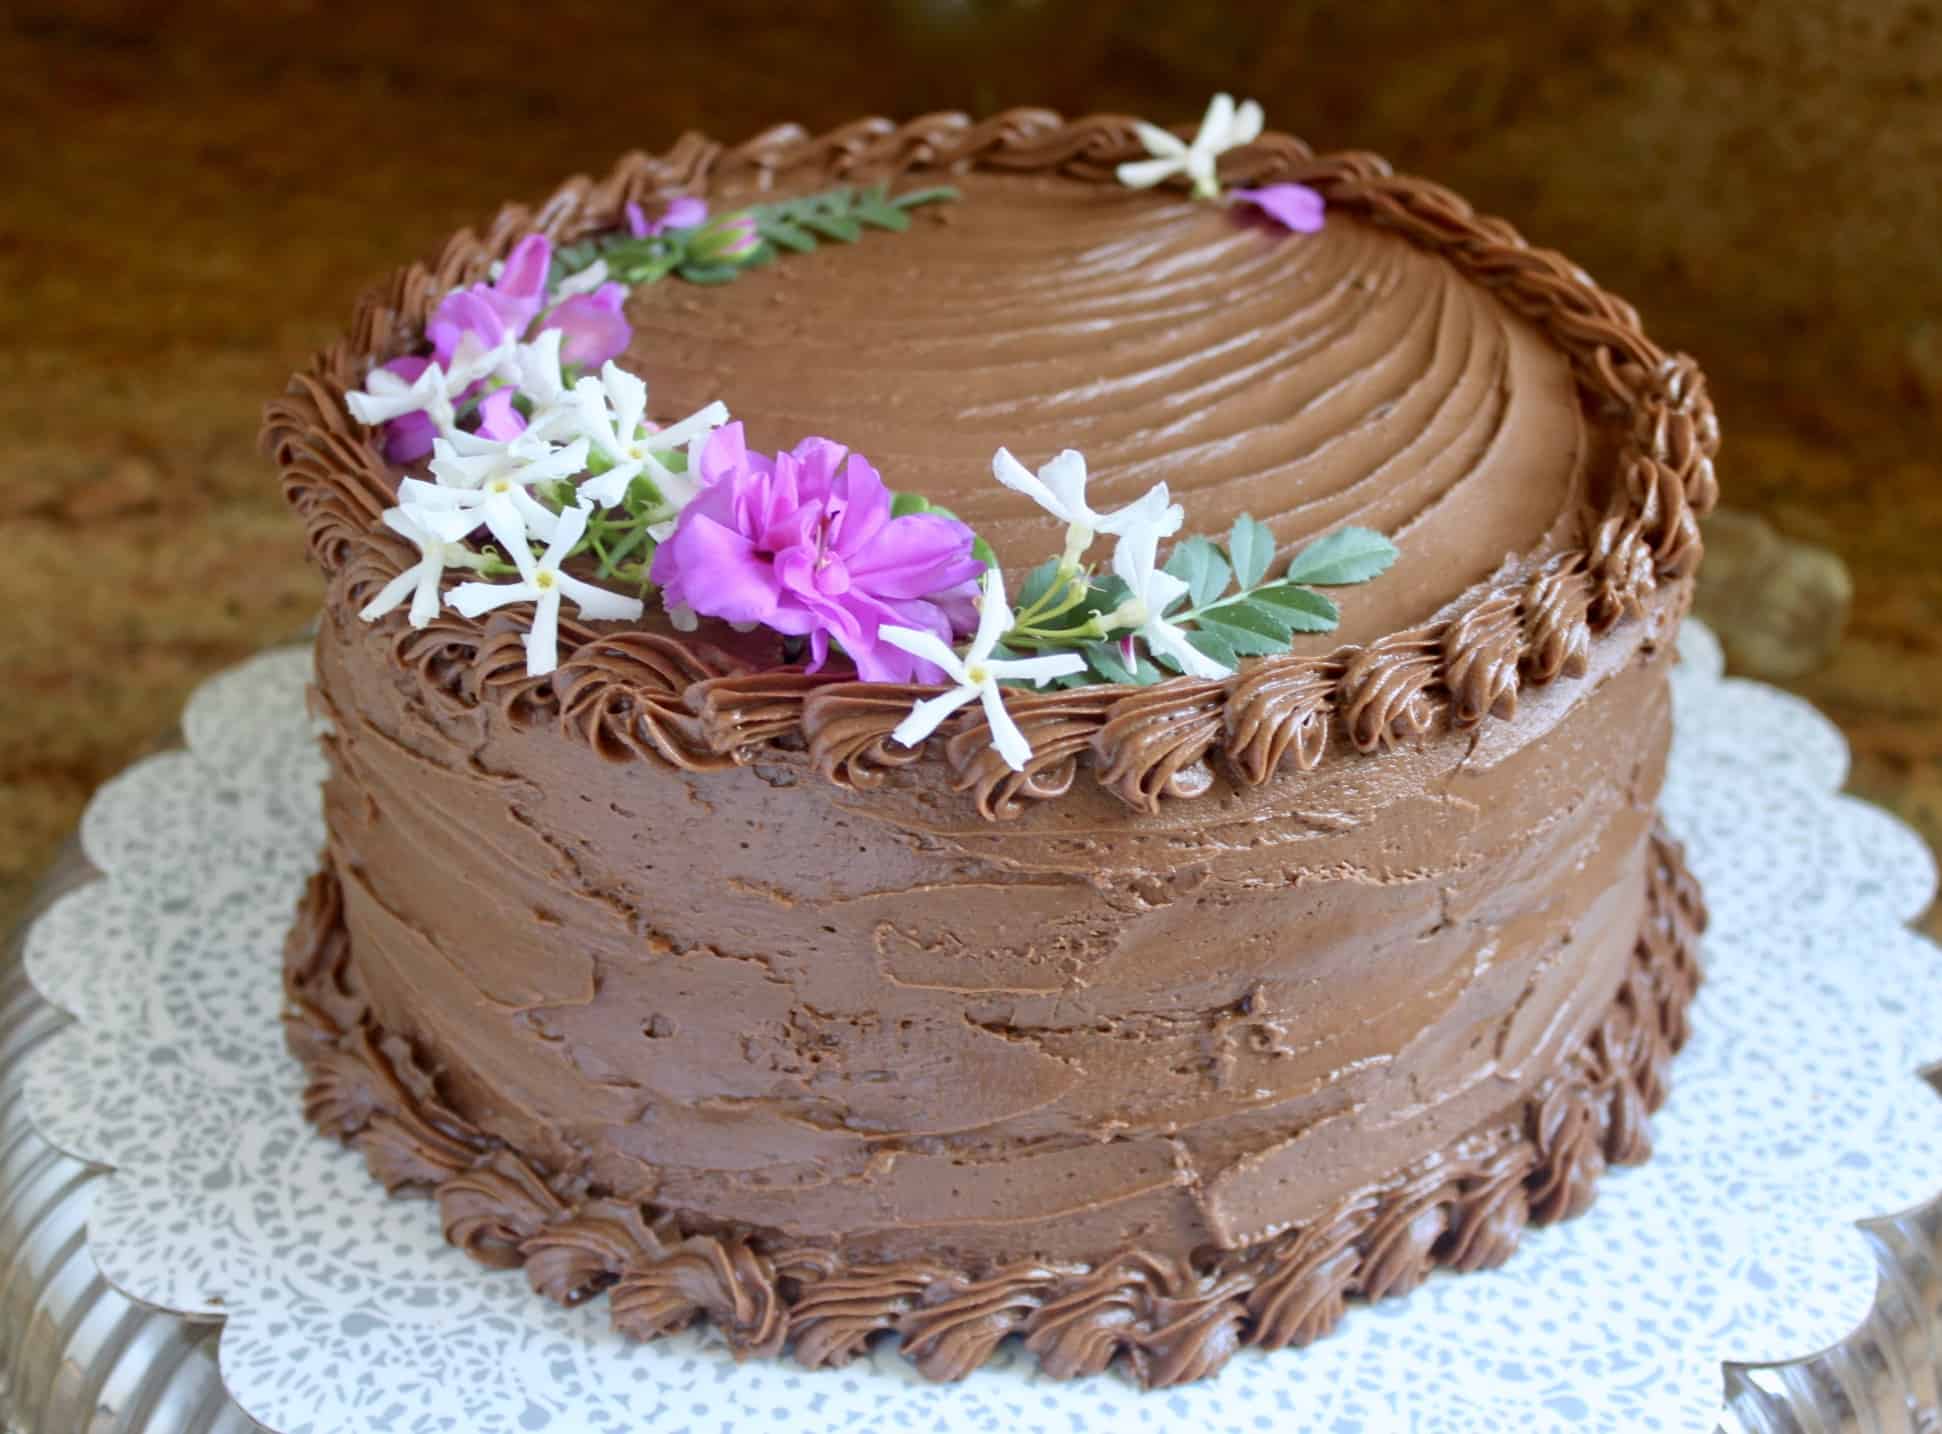 moist chocolate cake recipe with edible flowers on top